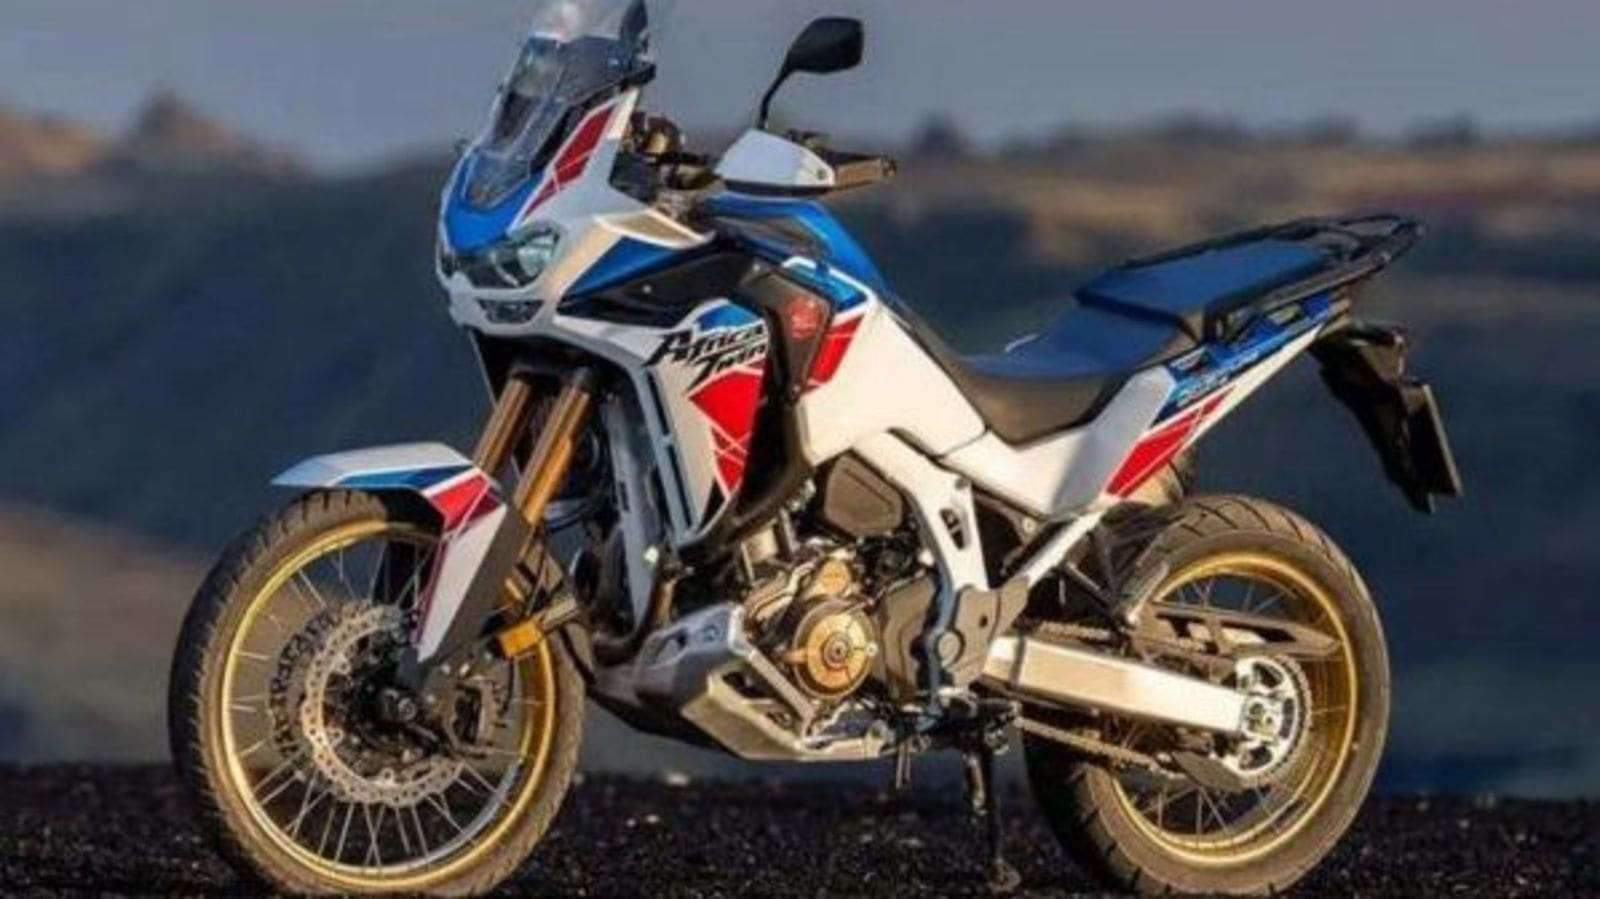 New Honda Africa Twin 1100 revealed with major mechanical upgrades